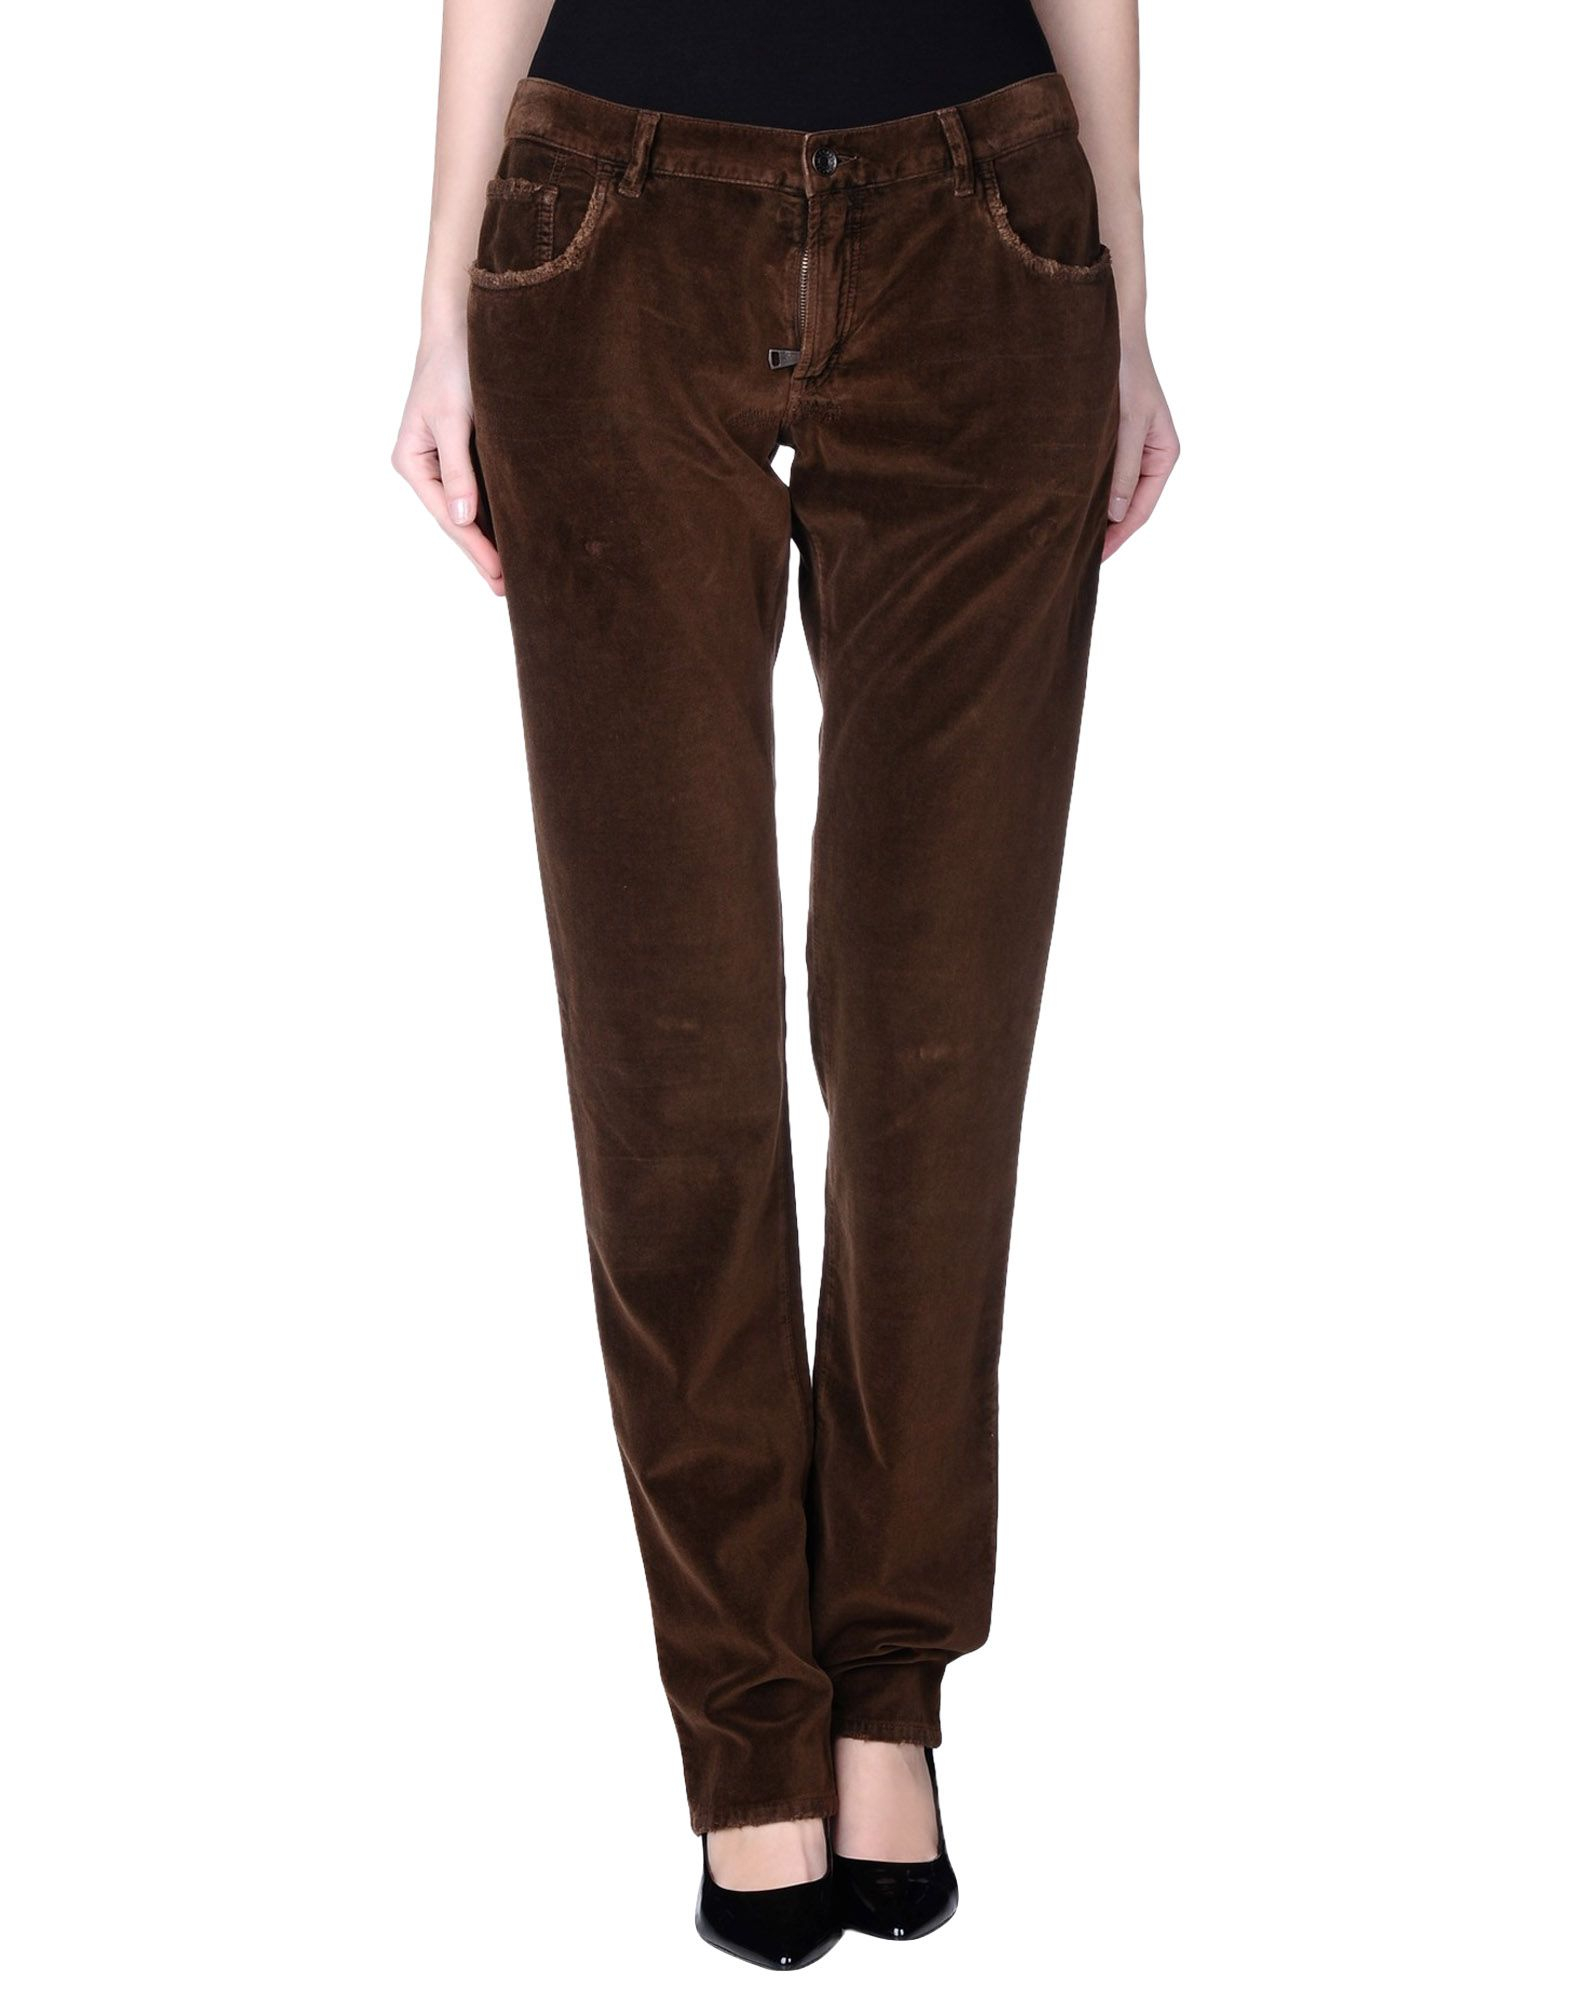 Lyst - Dolce & Gabbana Casual Trouser in Brown